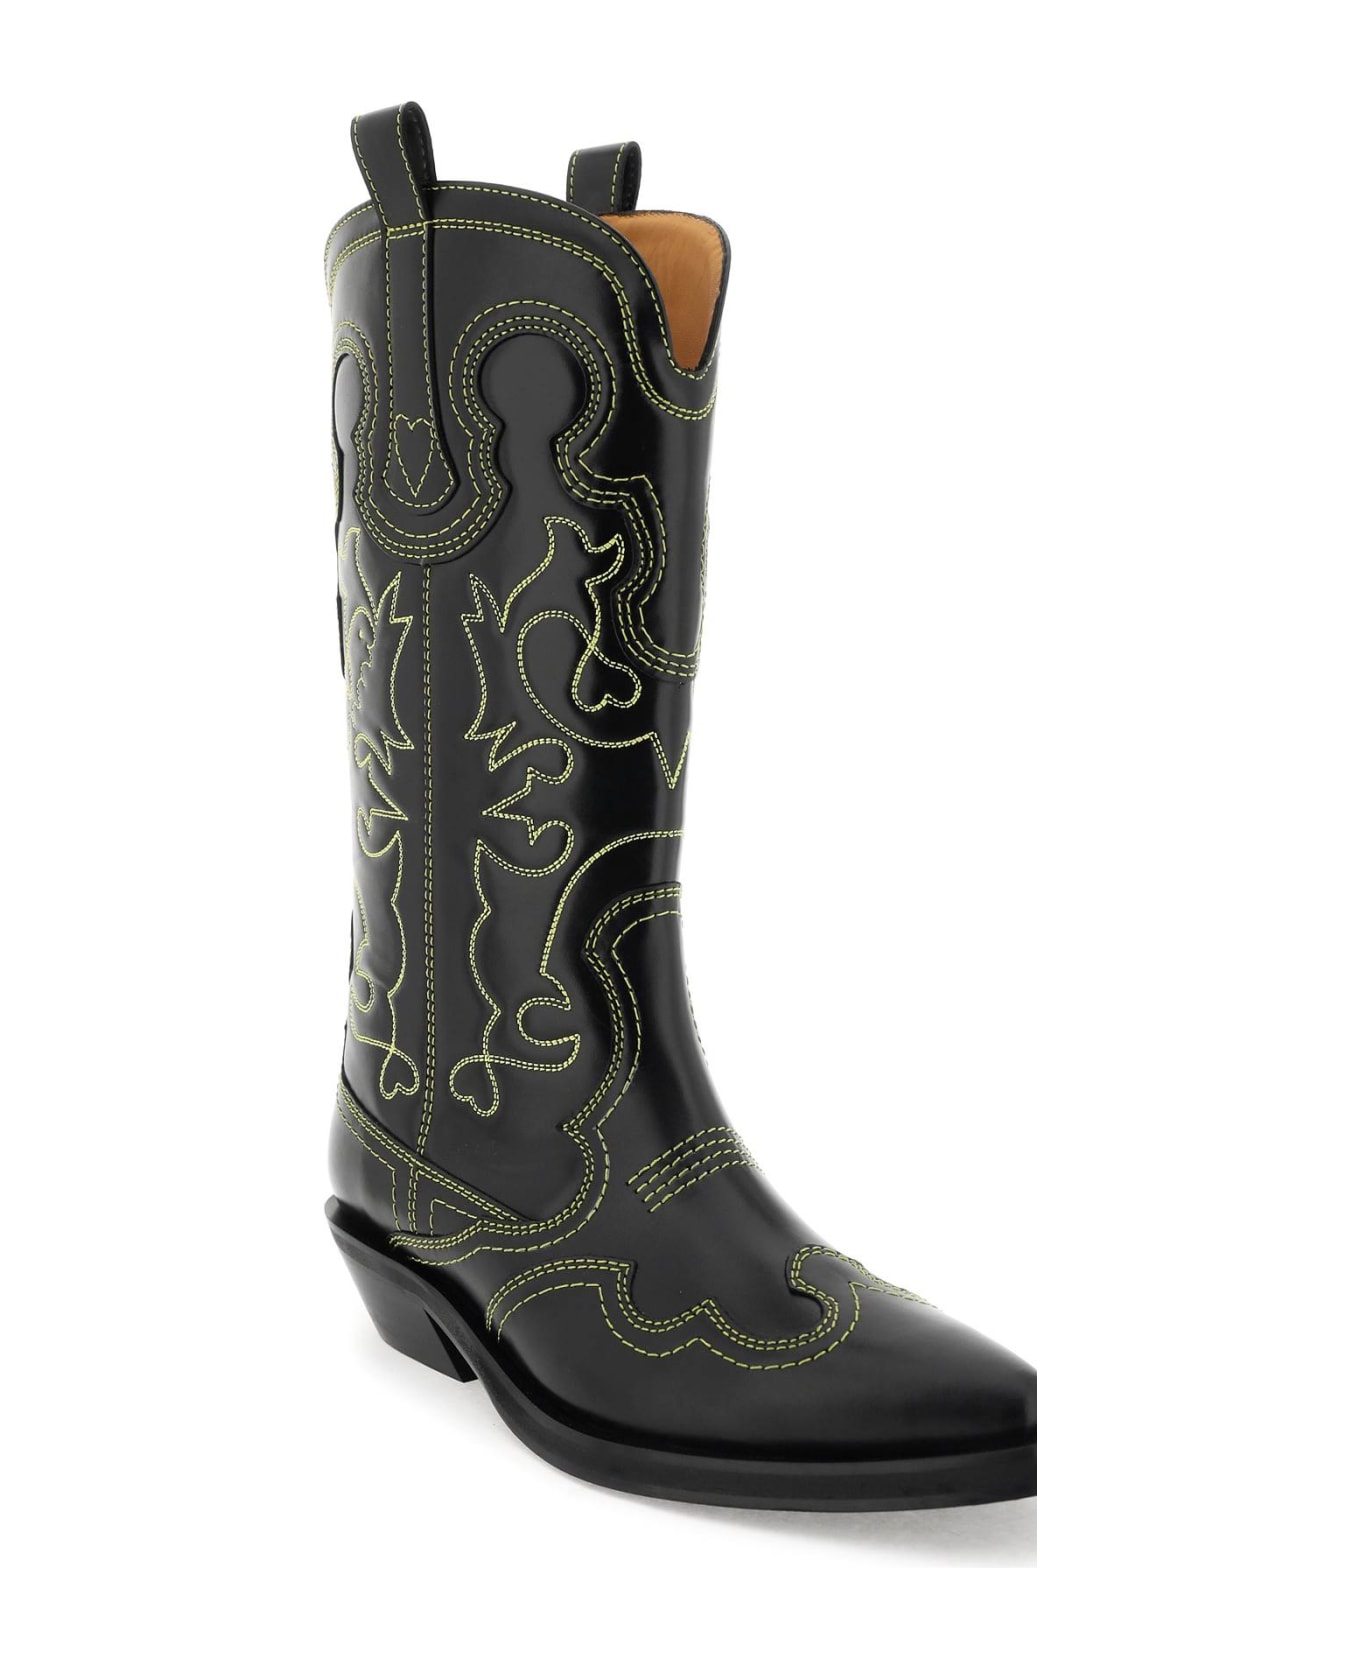 Ganni Embroidered Western Boots - Black ブーツ